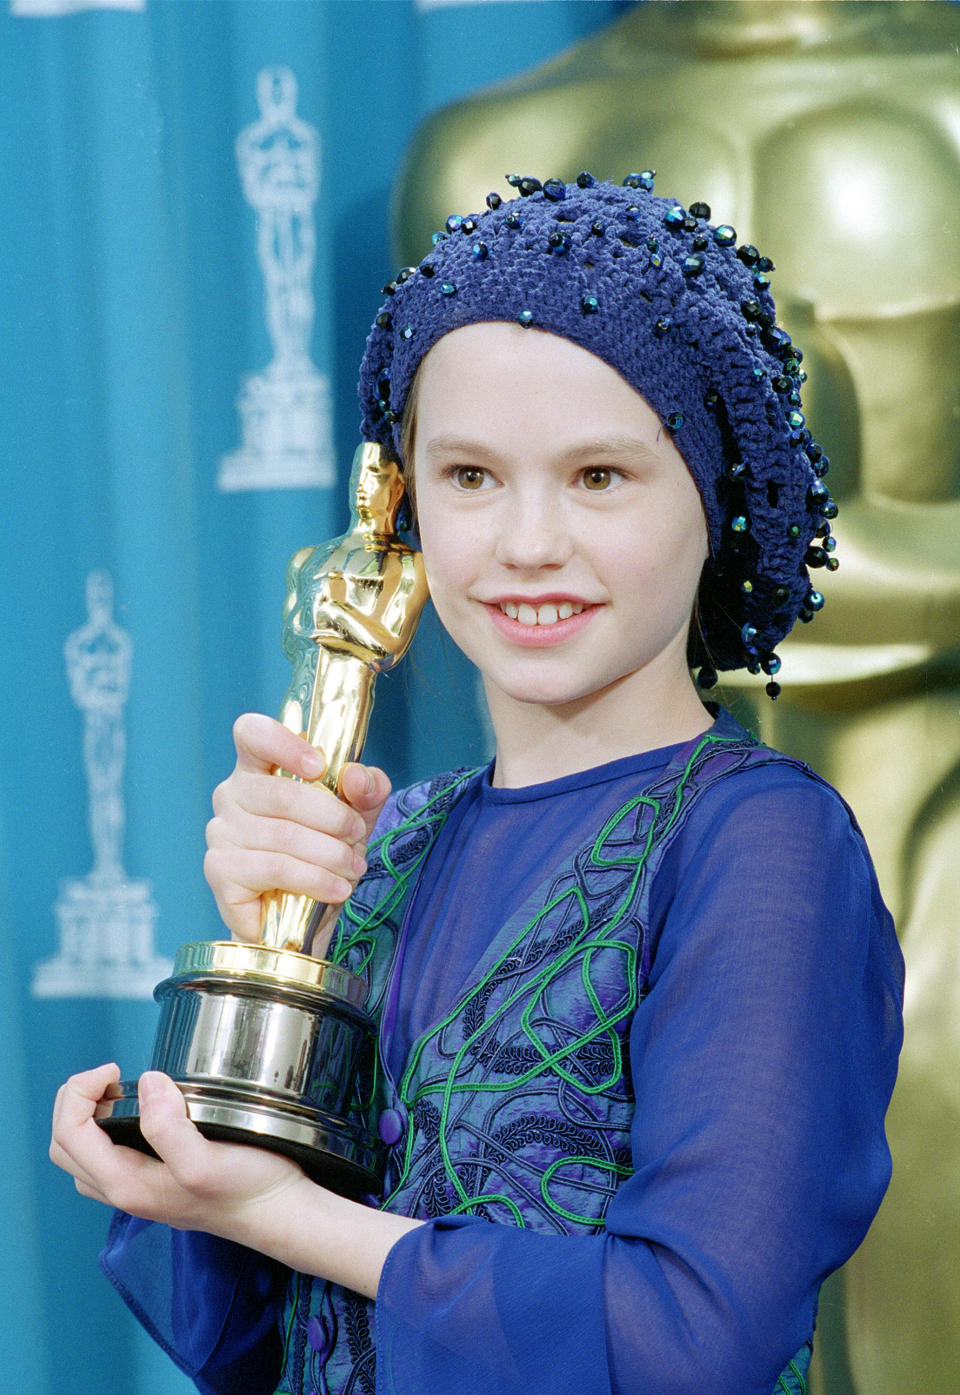 <strong>Then:</strong> Anna won the Oscar for Best Supporting Actress in 1994 at the age of 11 for her role in 'The Piano', making her the second youngest winner in Oscar history.